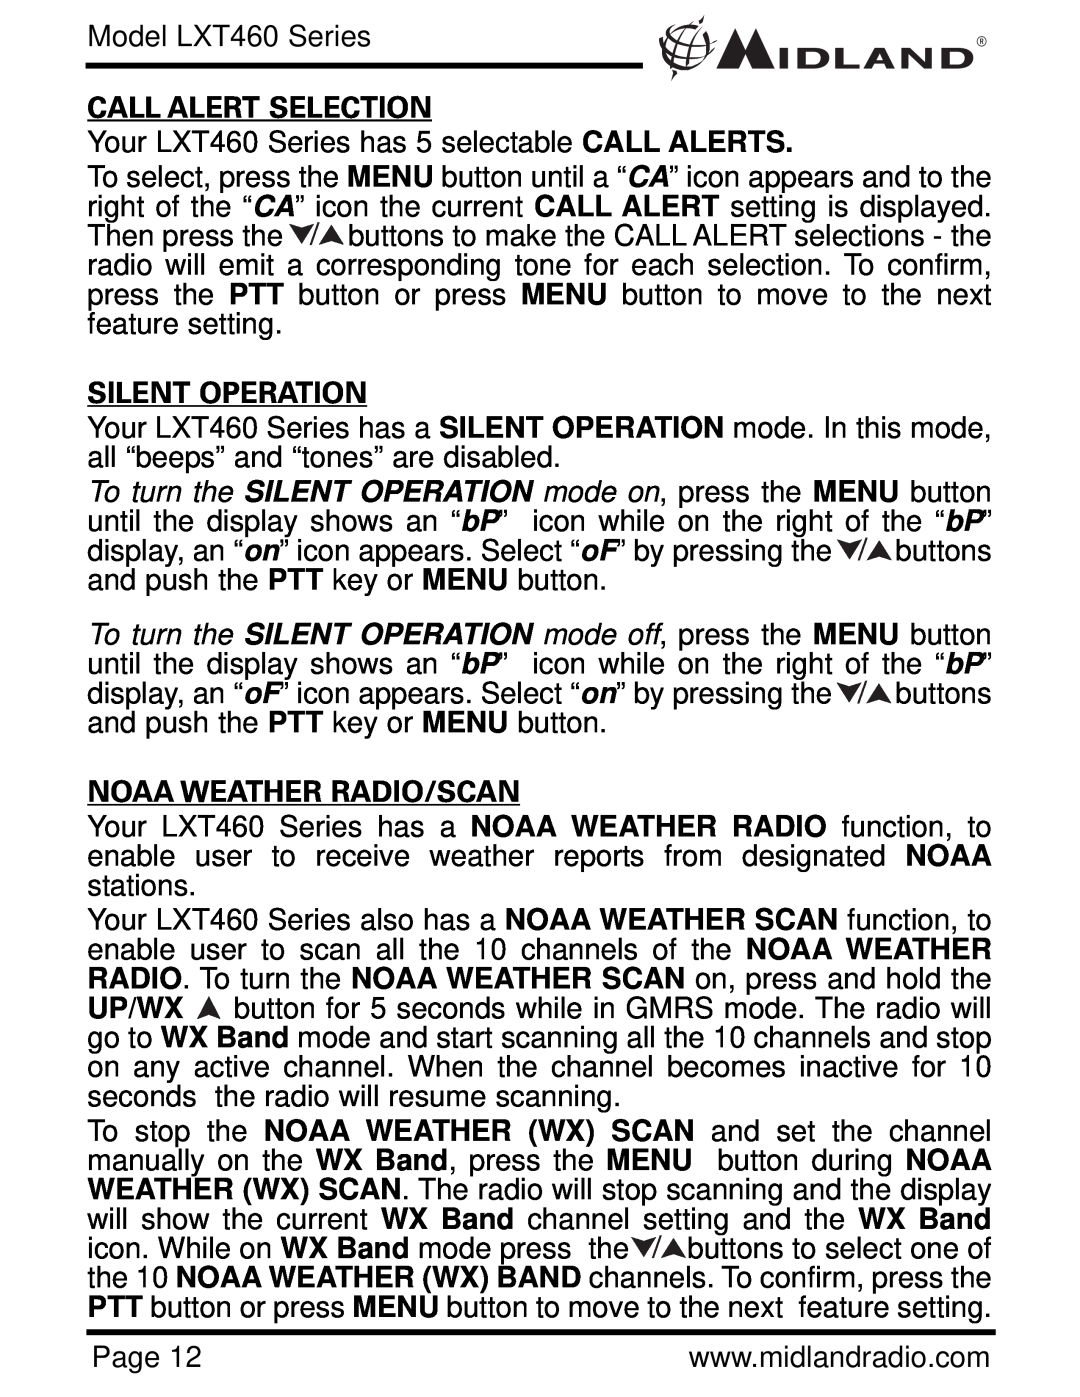 Midland Radio owner manual Call Alert Selection, Silent Operation, Noaa Weather Radio/Scan, Model LXT460 Series 